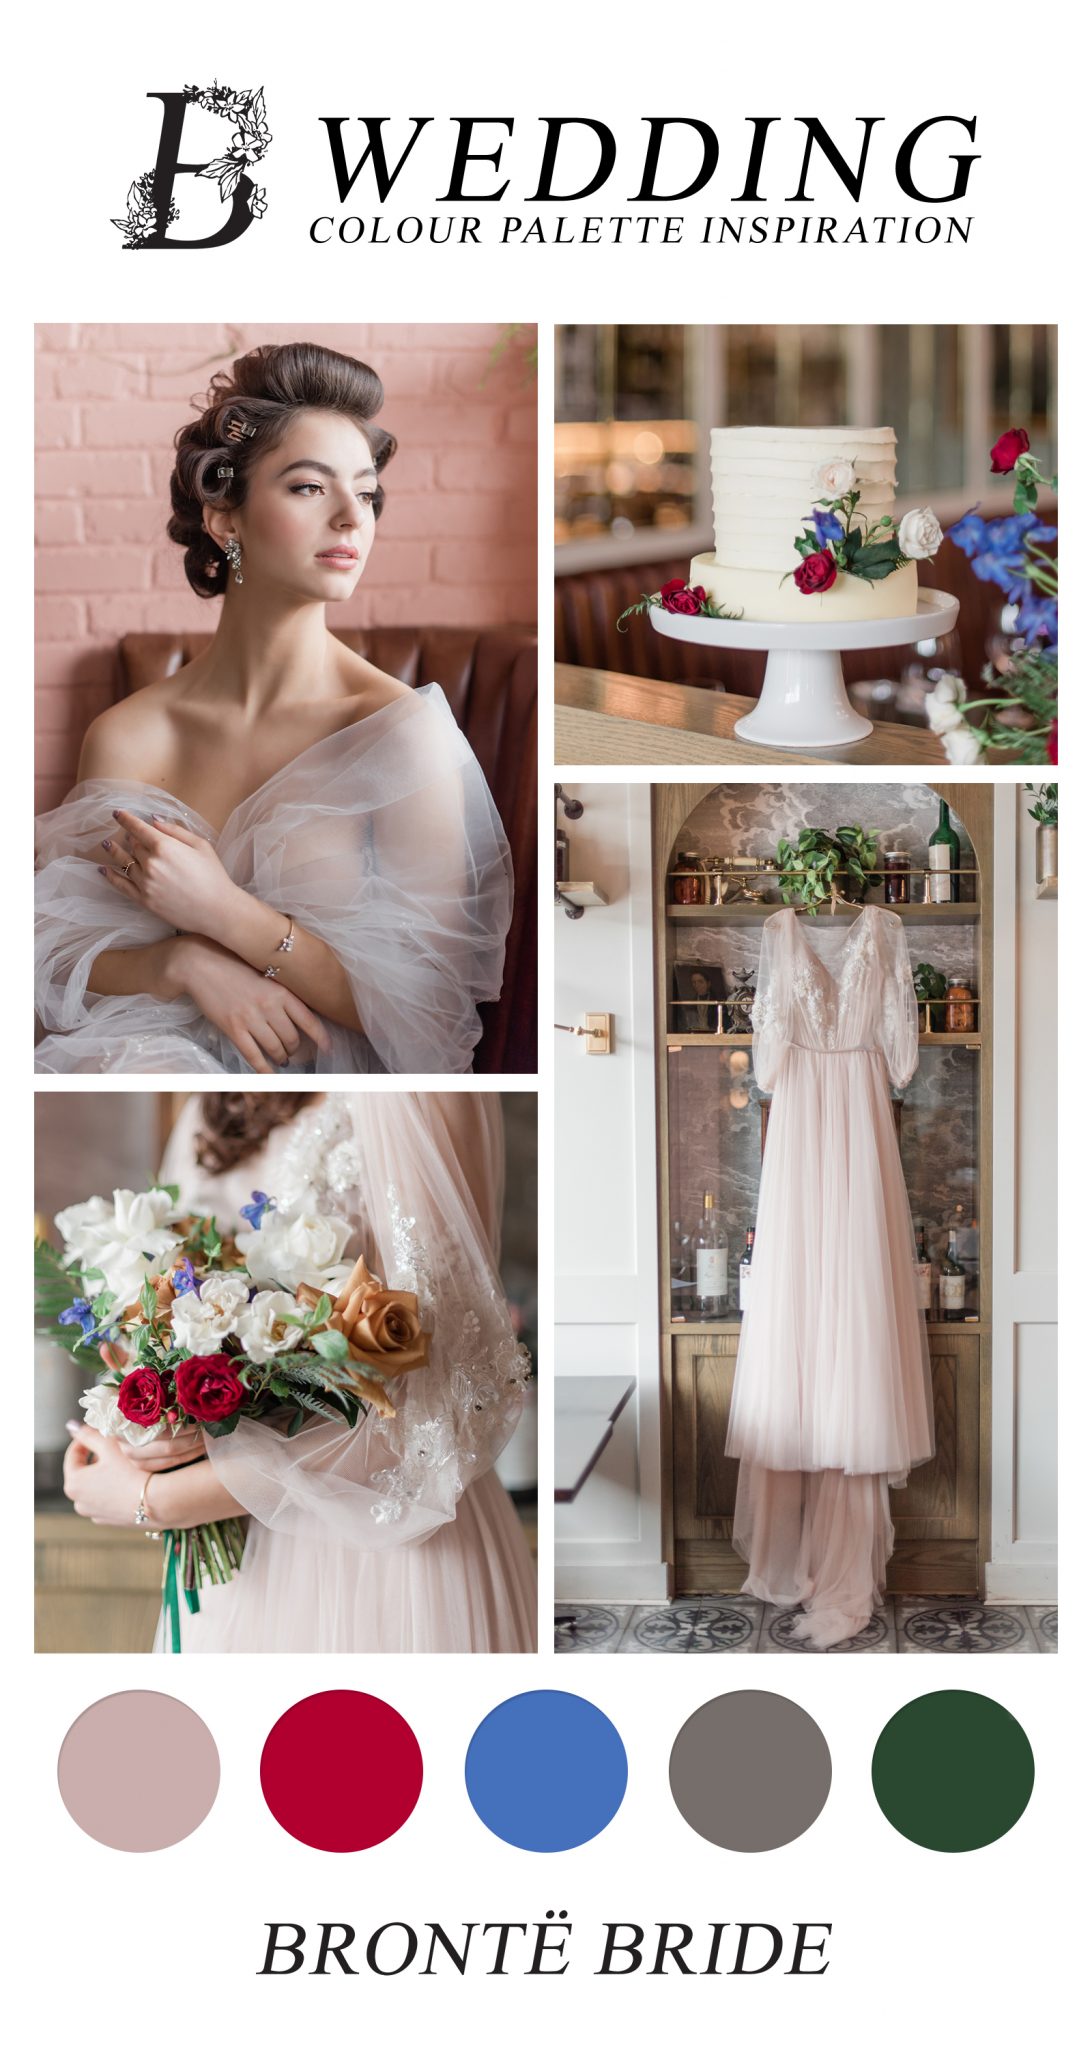 Romantically Regal Bridal Inspiration at the Royale YYC - wedding inspiration featured on Brontë Bride - Modern Wedding Colour Palette Inspiration